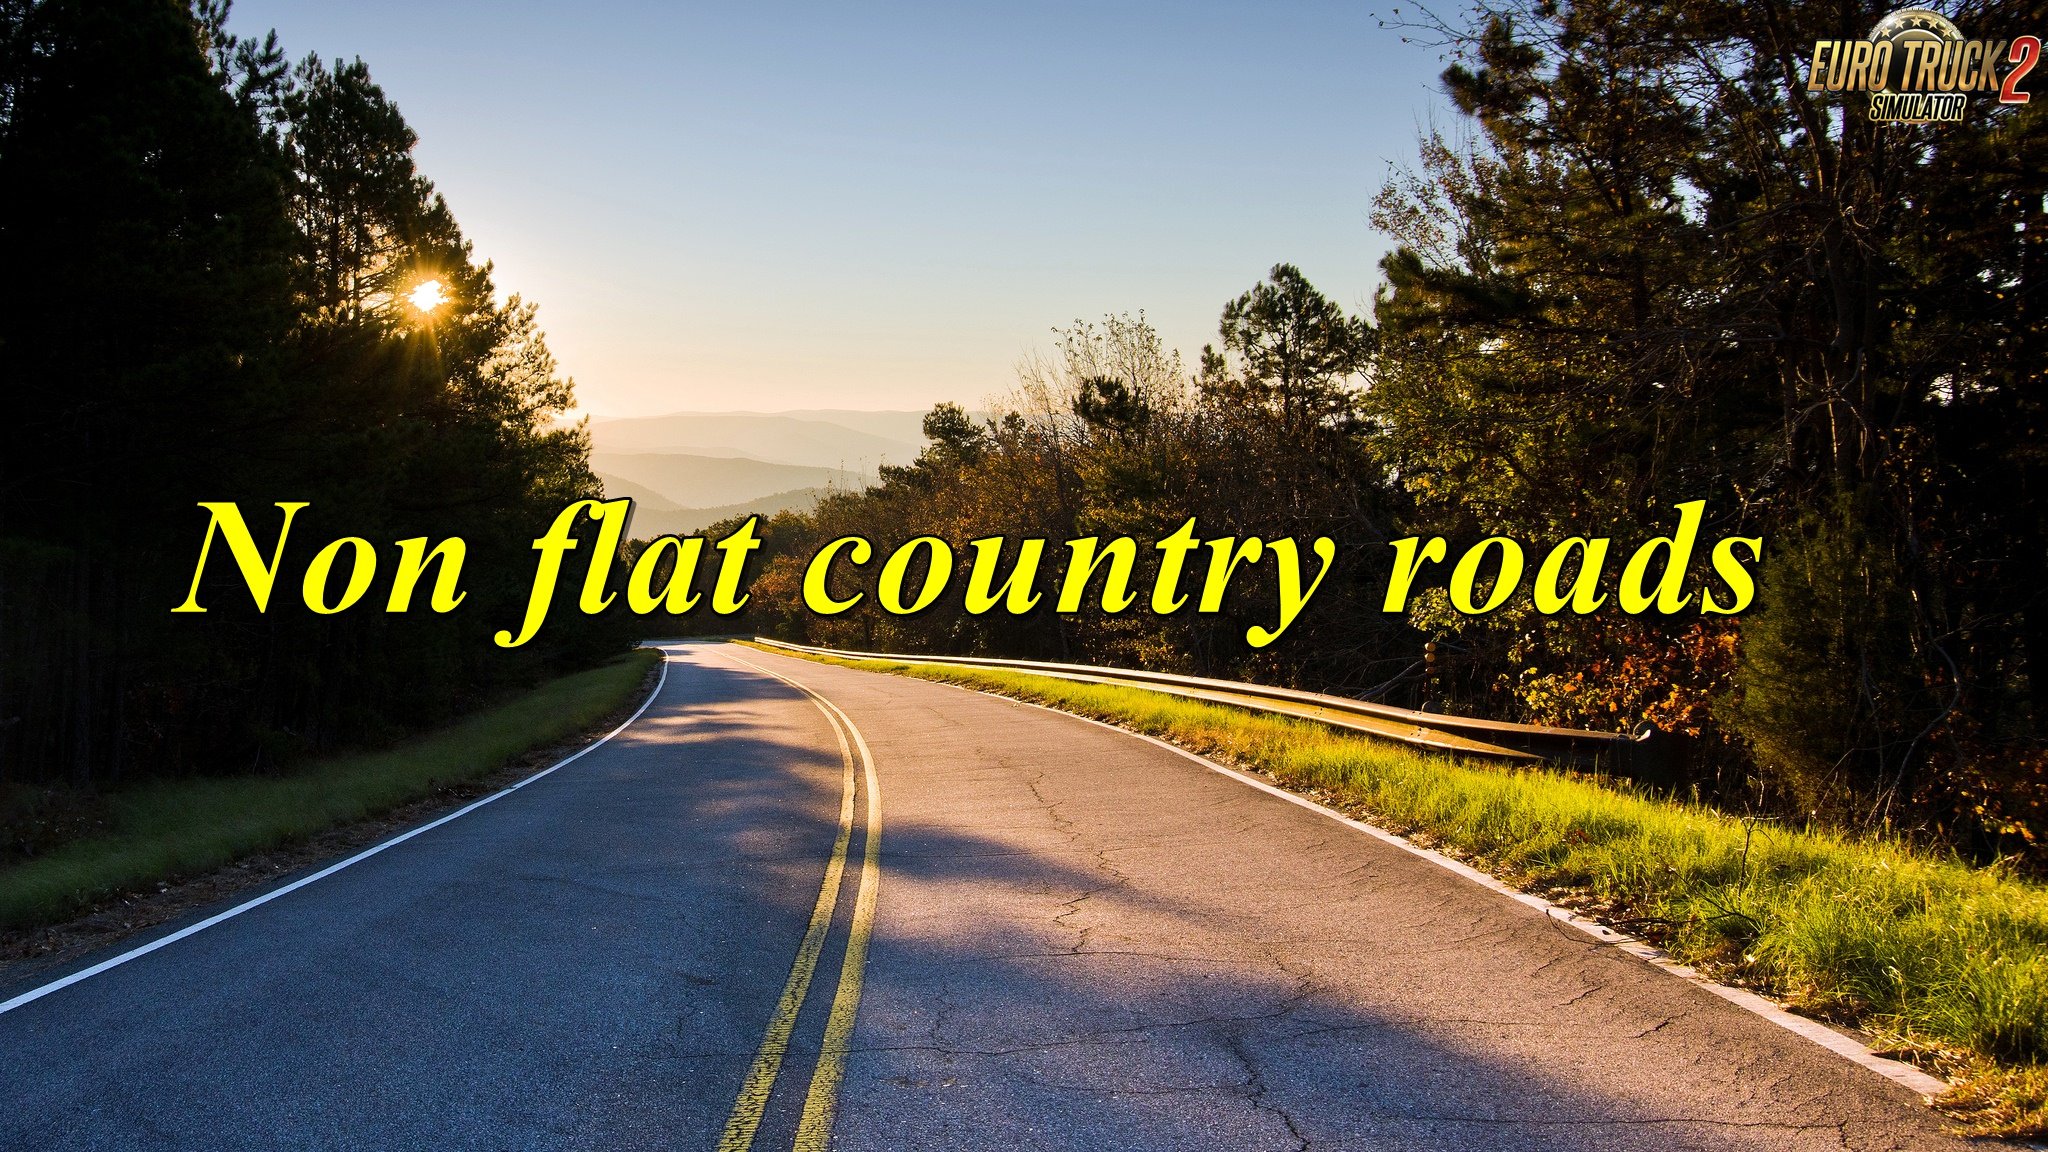 Non flat country roads v 0.2 by Todor Alin